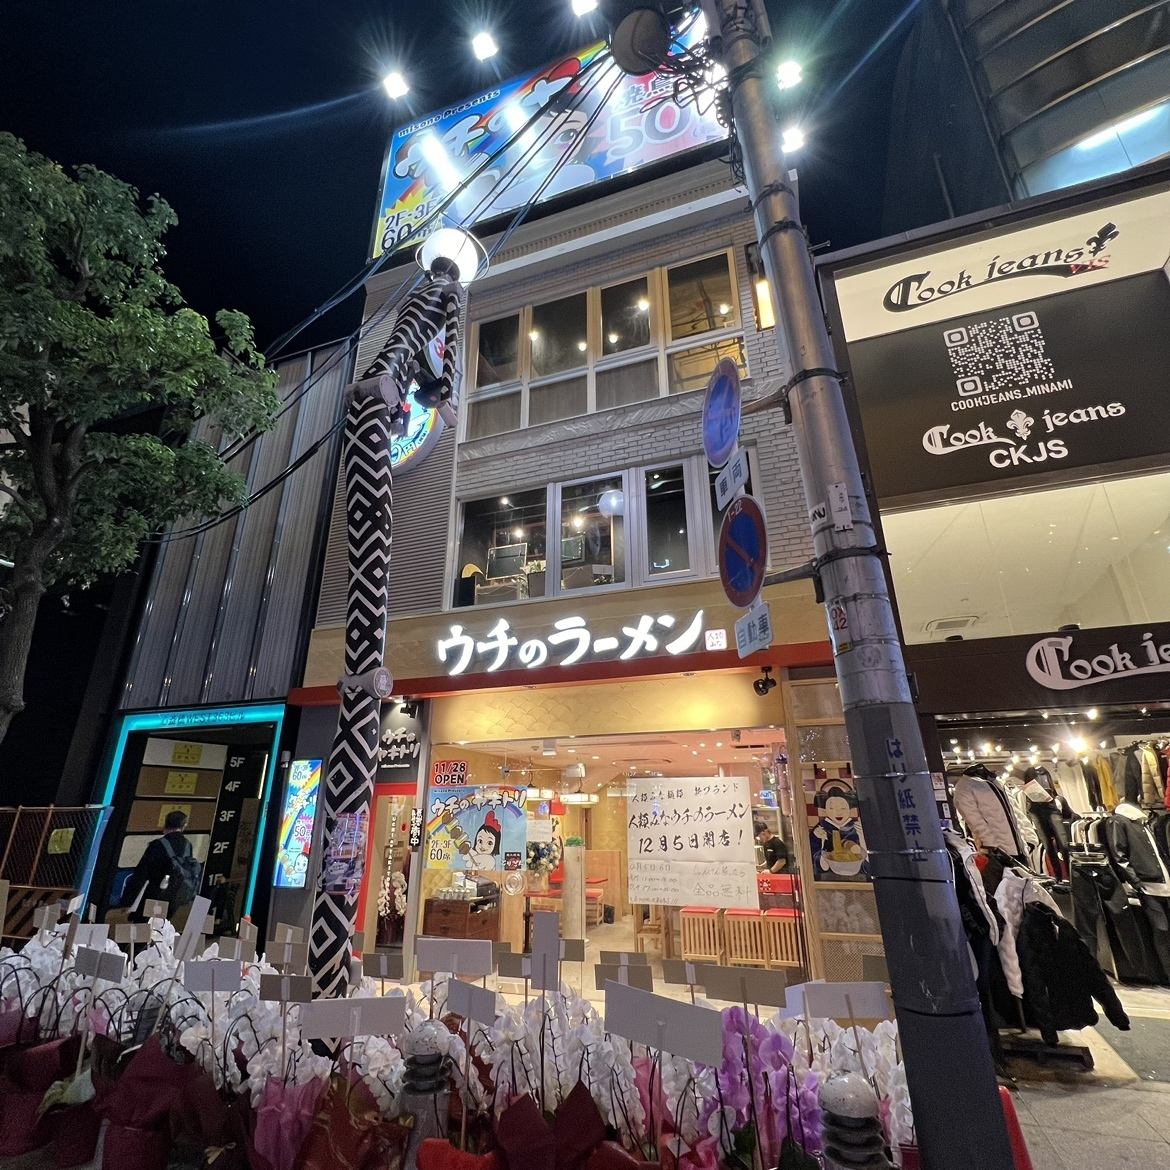 misono presents! Open in front of Big Step in Amemura, Shinsaibashi!